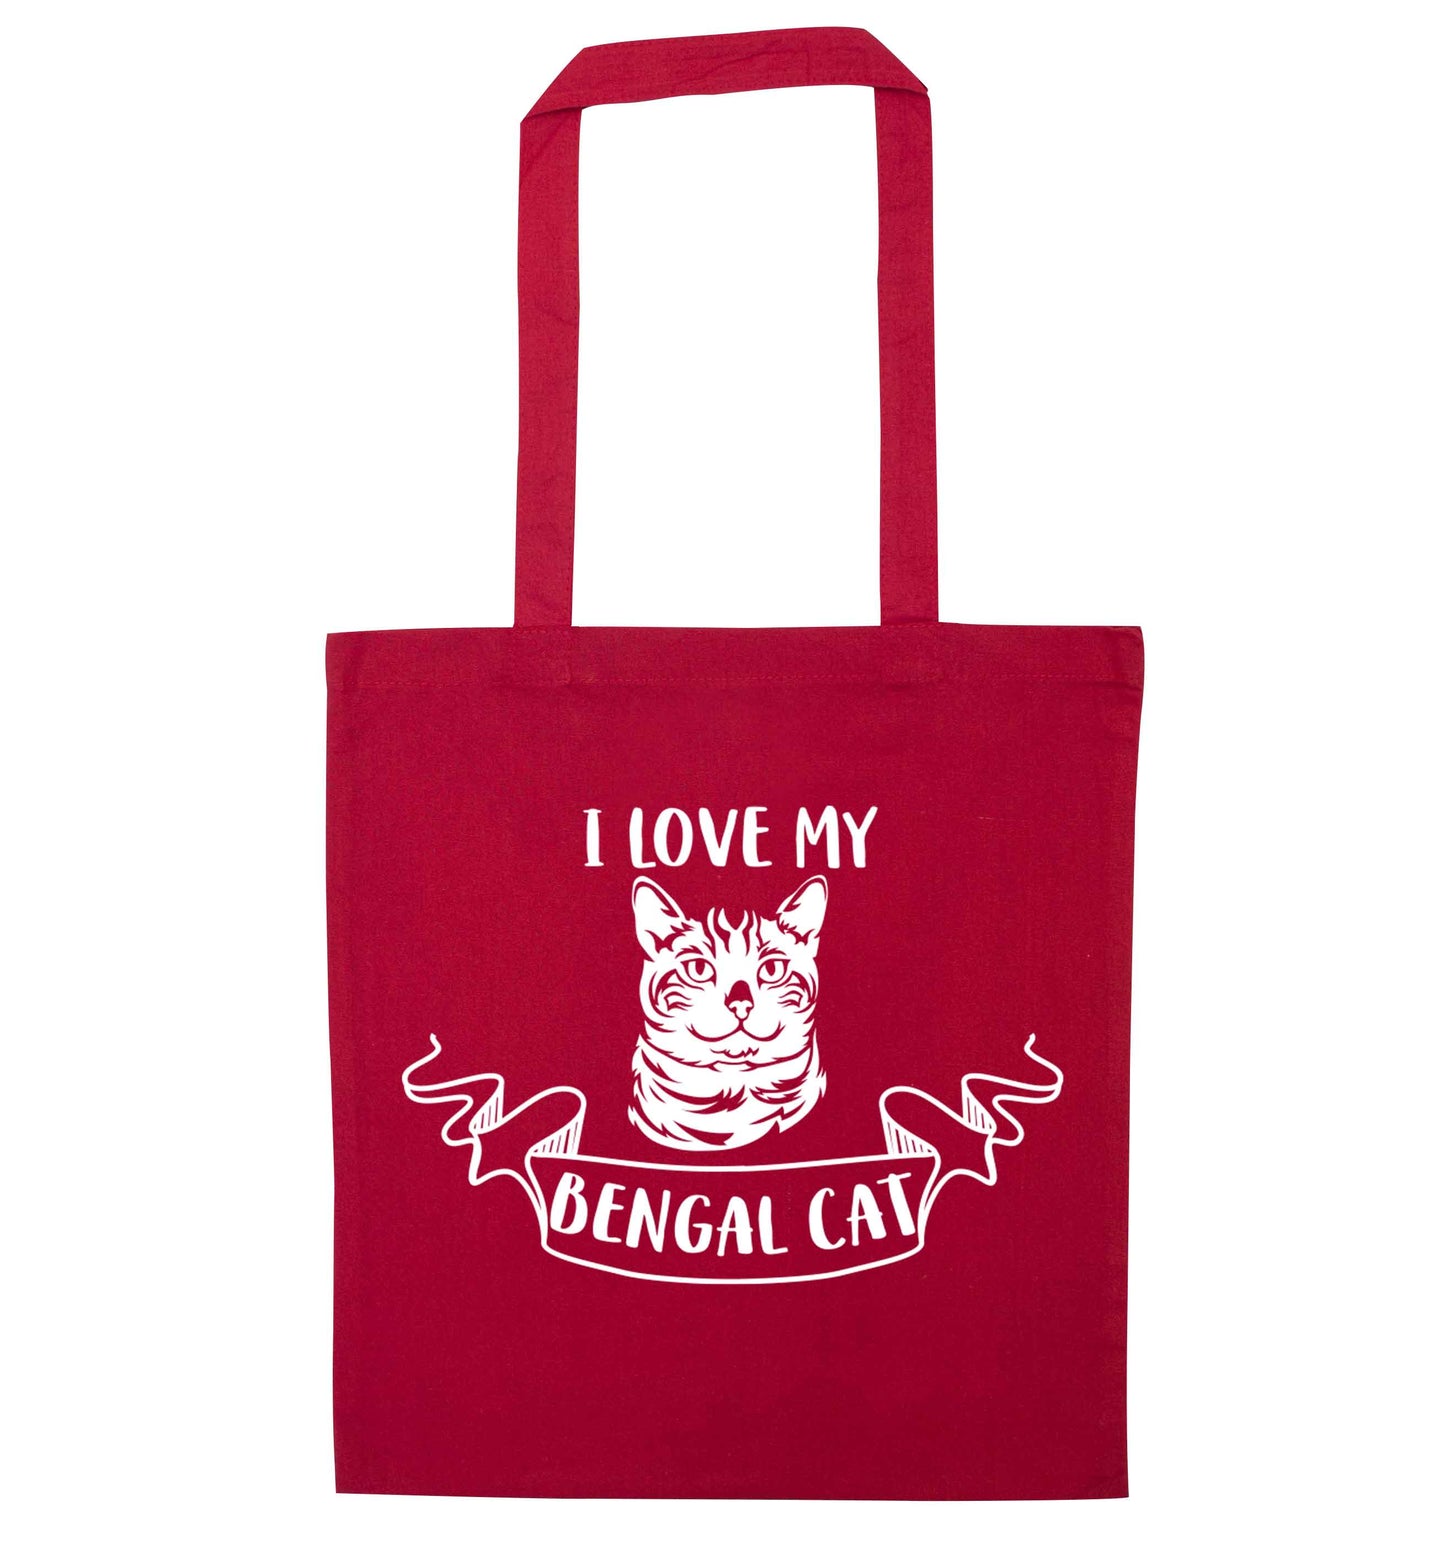 I love my begnal cat red tote bag